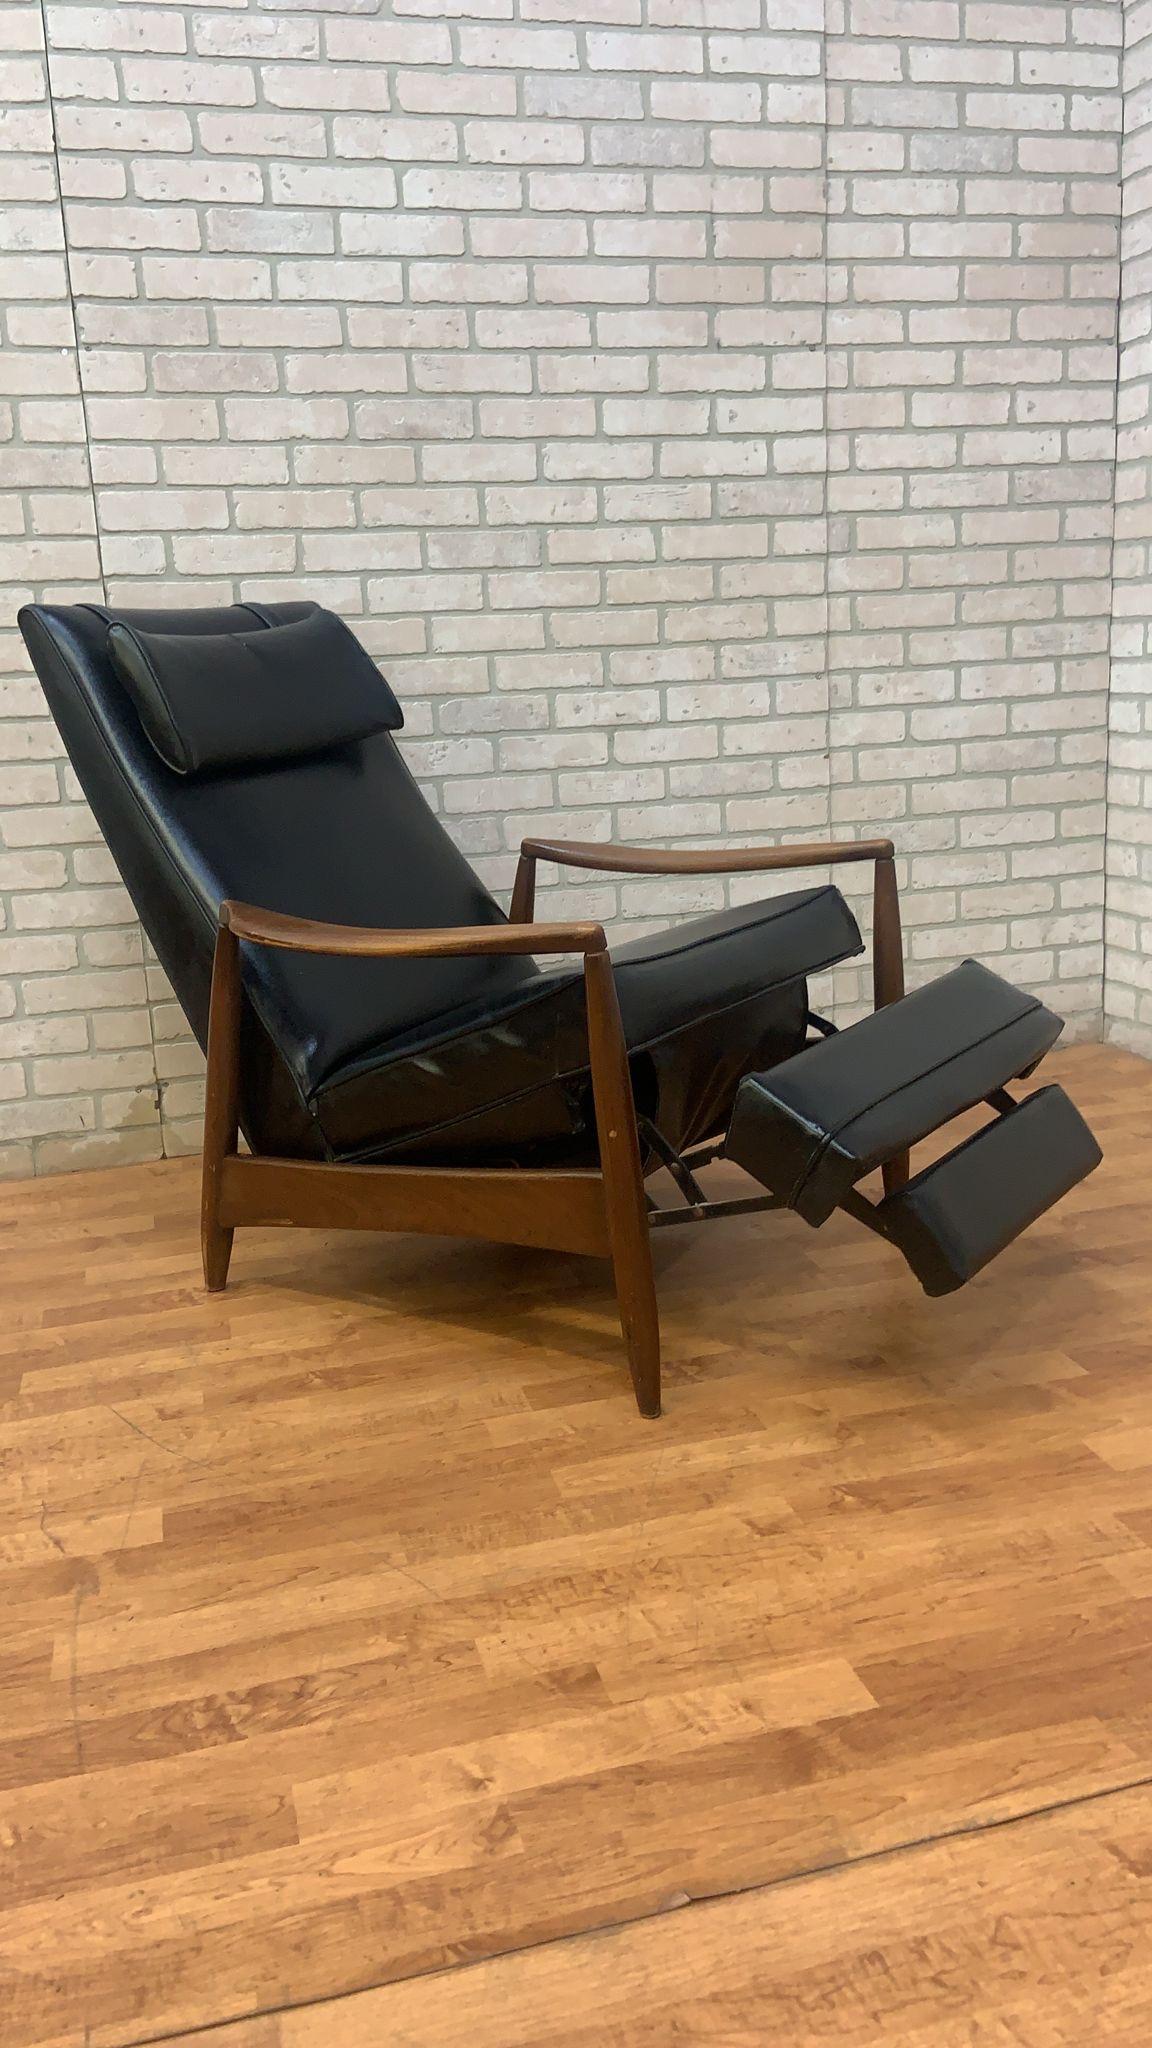 Mid Century Modern Milo Baughman Style Aston Re-Invented Recliner in Black Leather 

This amazing mid-century Milo Baughman Style Recliner would be a perfect addition to any living space! Constructed with Walnut and a black leather chair surprises